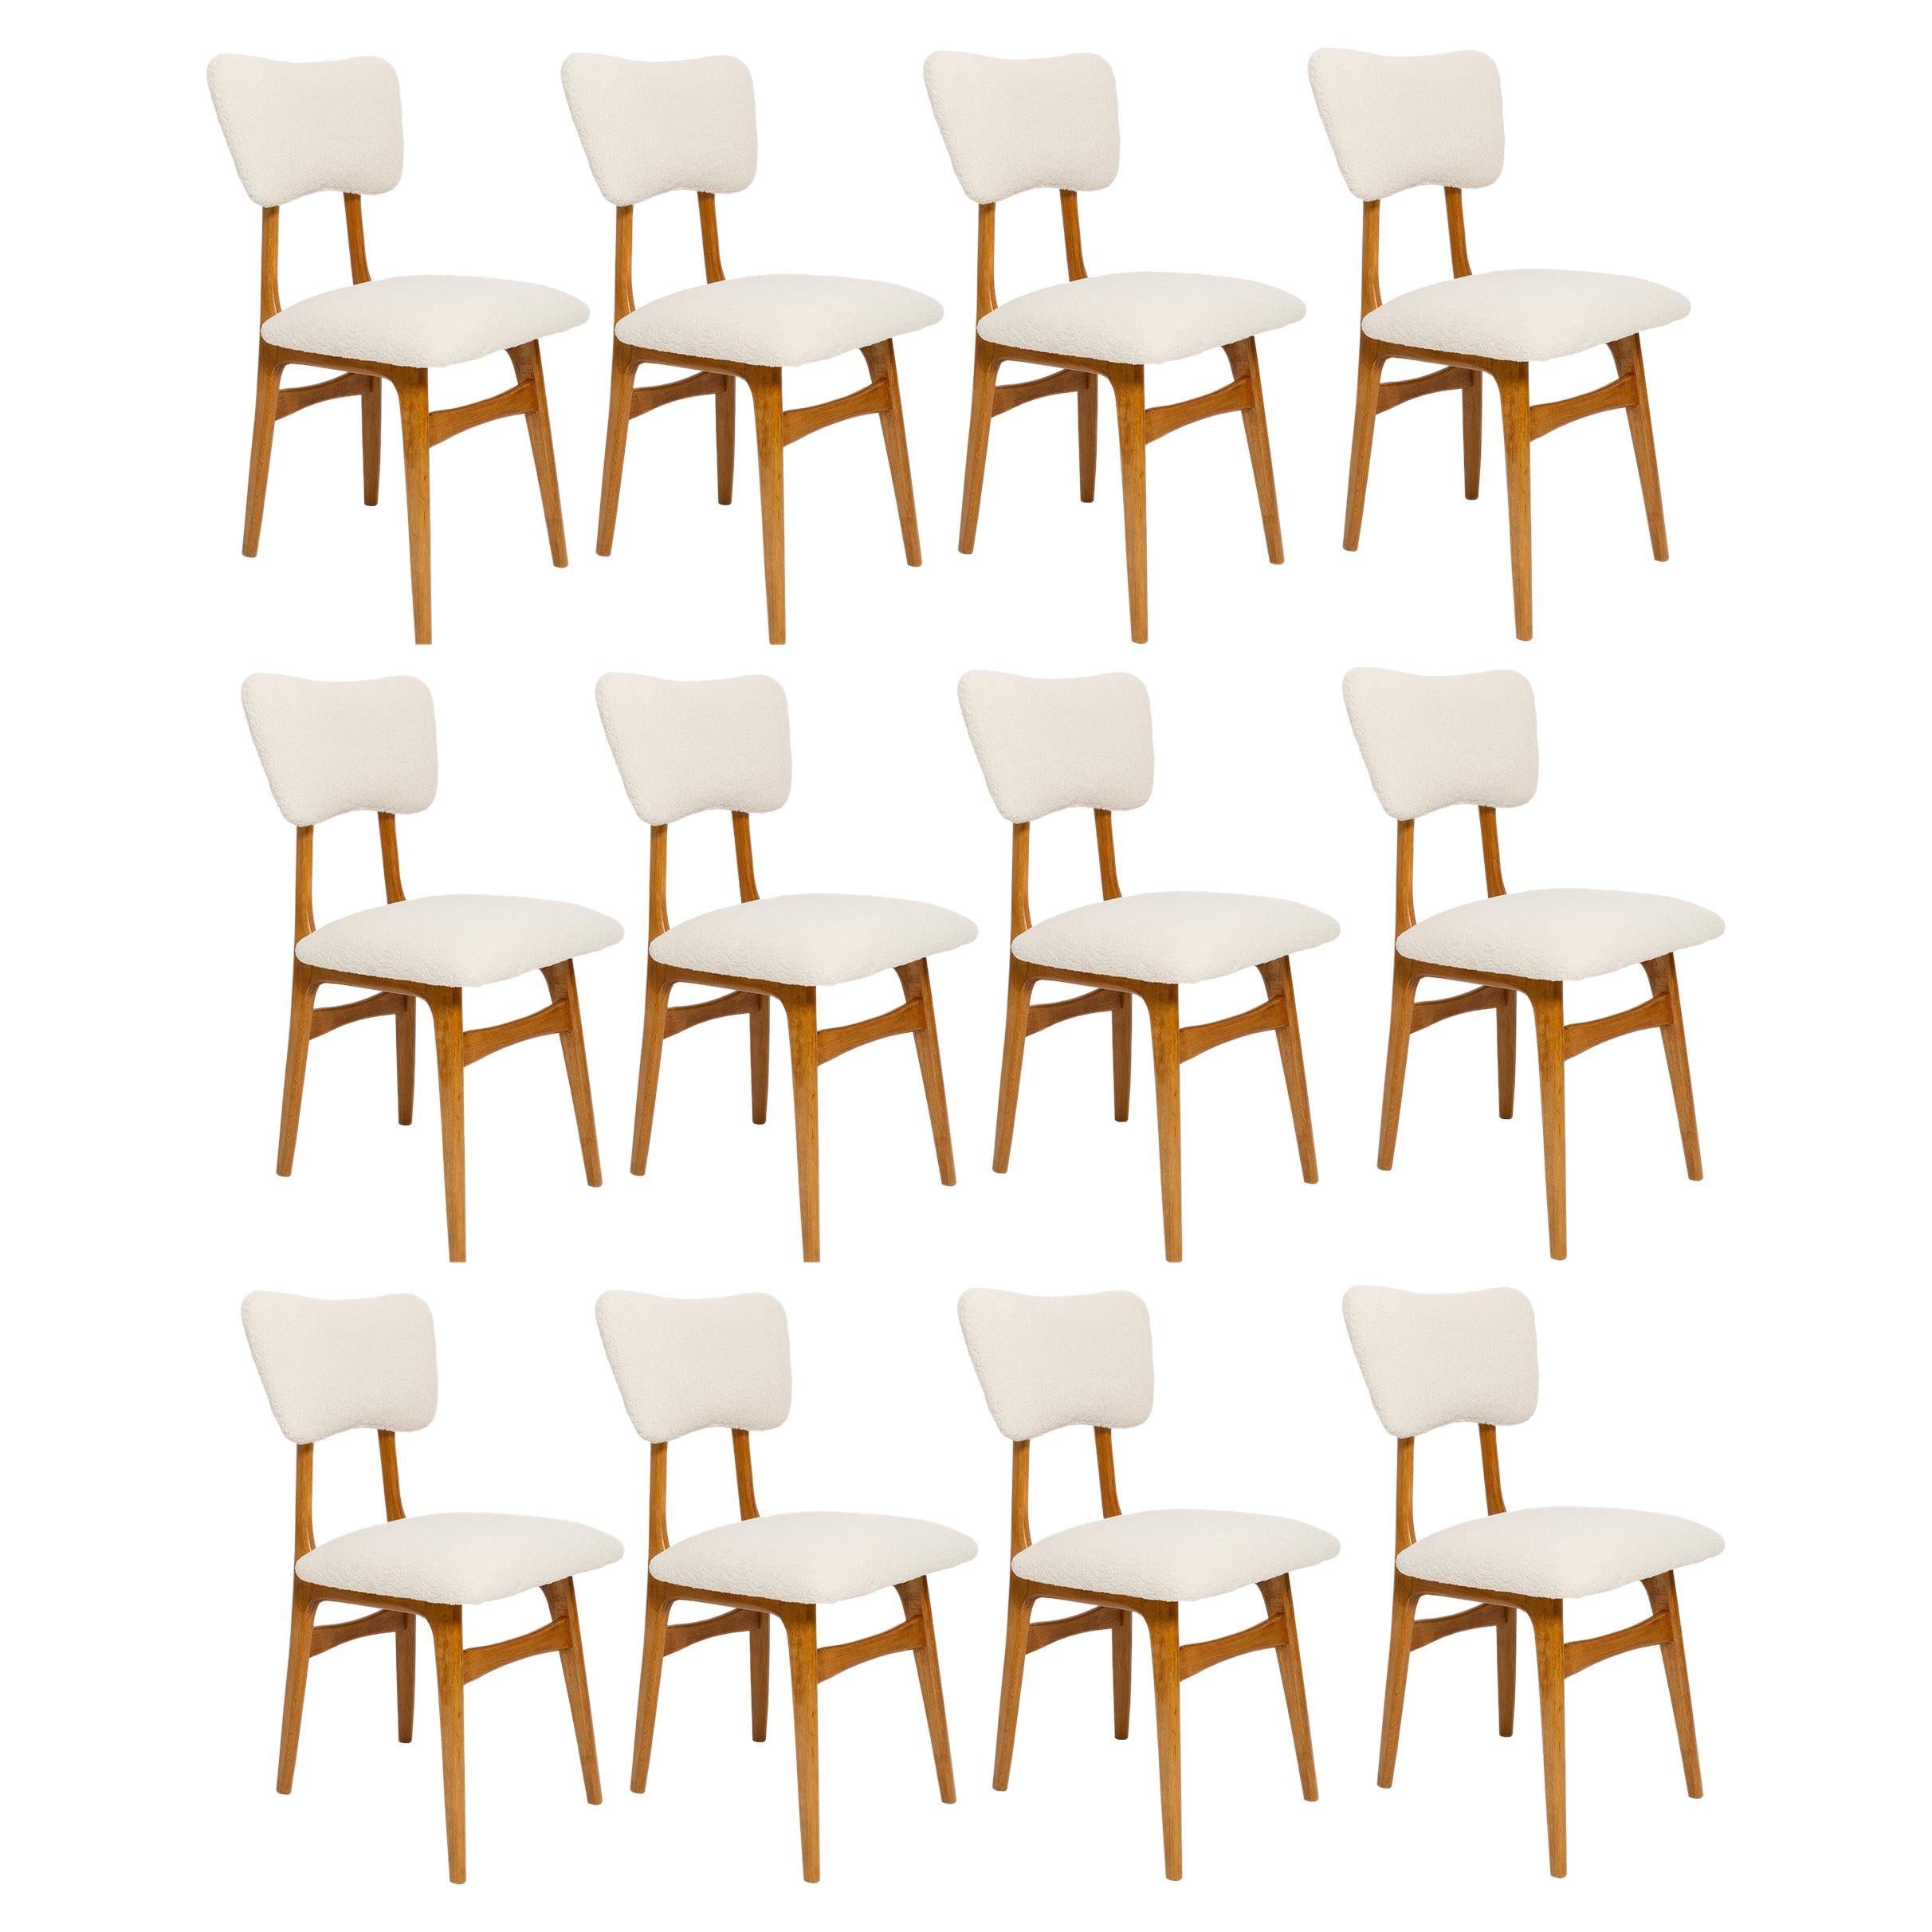 Set of Twelve 20th Century Cream Boucle Butterfly Chairs, 1960s, Poland For Sale